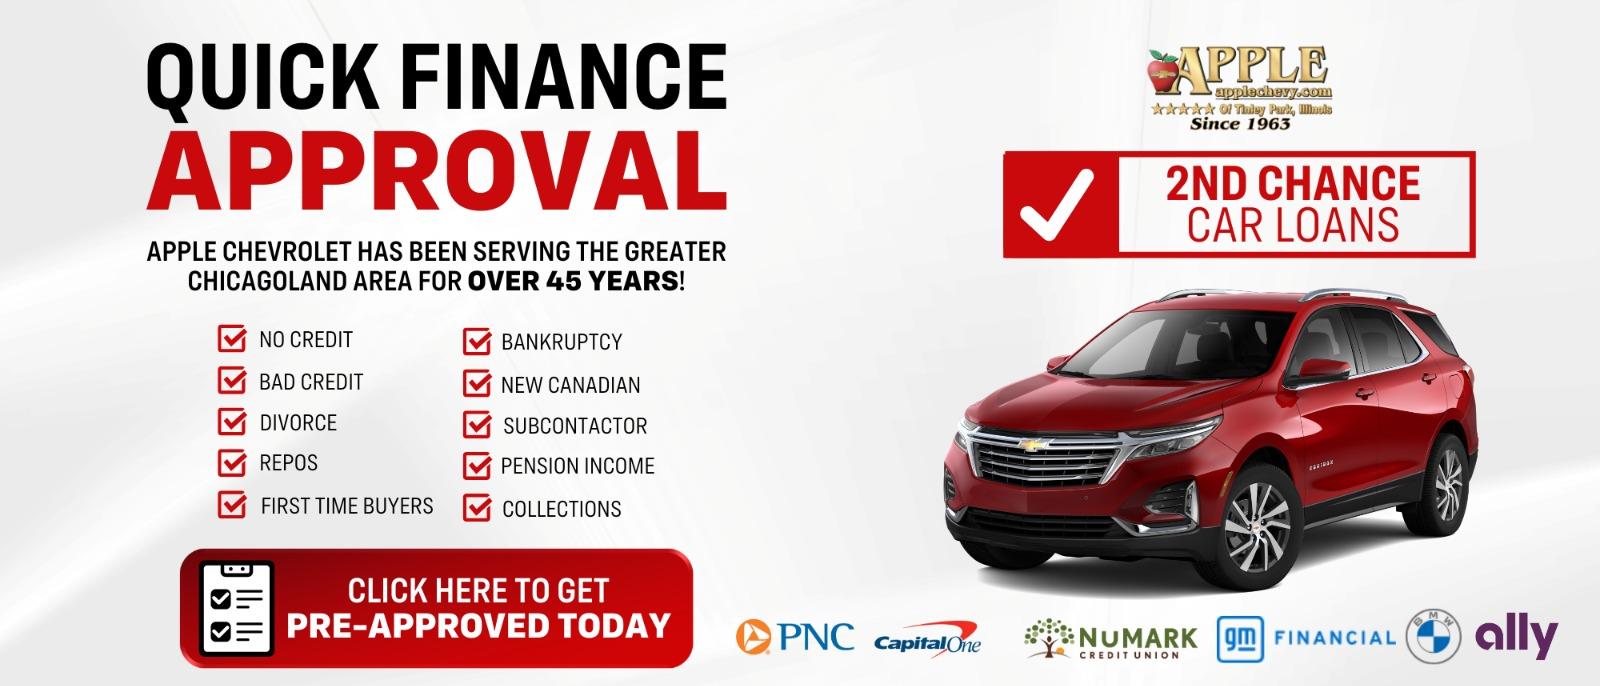 QUICK FINANCE APPROVAL APPLE CHEVROLET HAS BEEN SERVING THE GREATER CHICHAGOLAND AREA FOR OVER 45 YEARS!